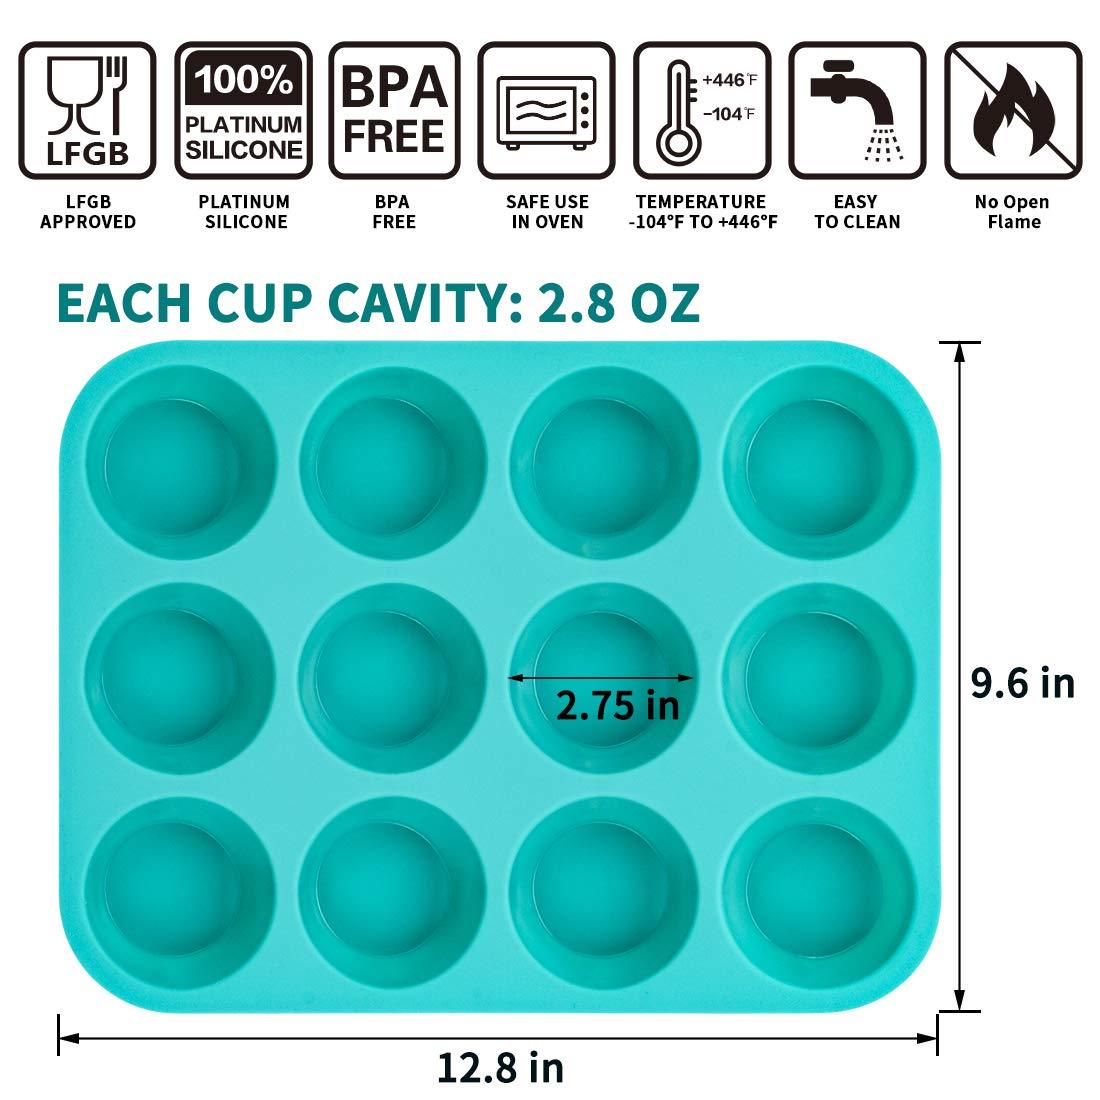 CAKETIME Silicone Muffin Pan Set - Cupcake Pans 12 Cups Silicone Baking Molds,BPA Free 100% Food Grade, Pinch Test Approved, Pack of 2 - CookCave